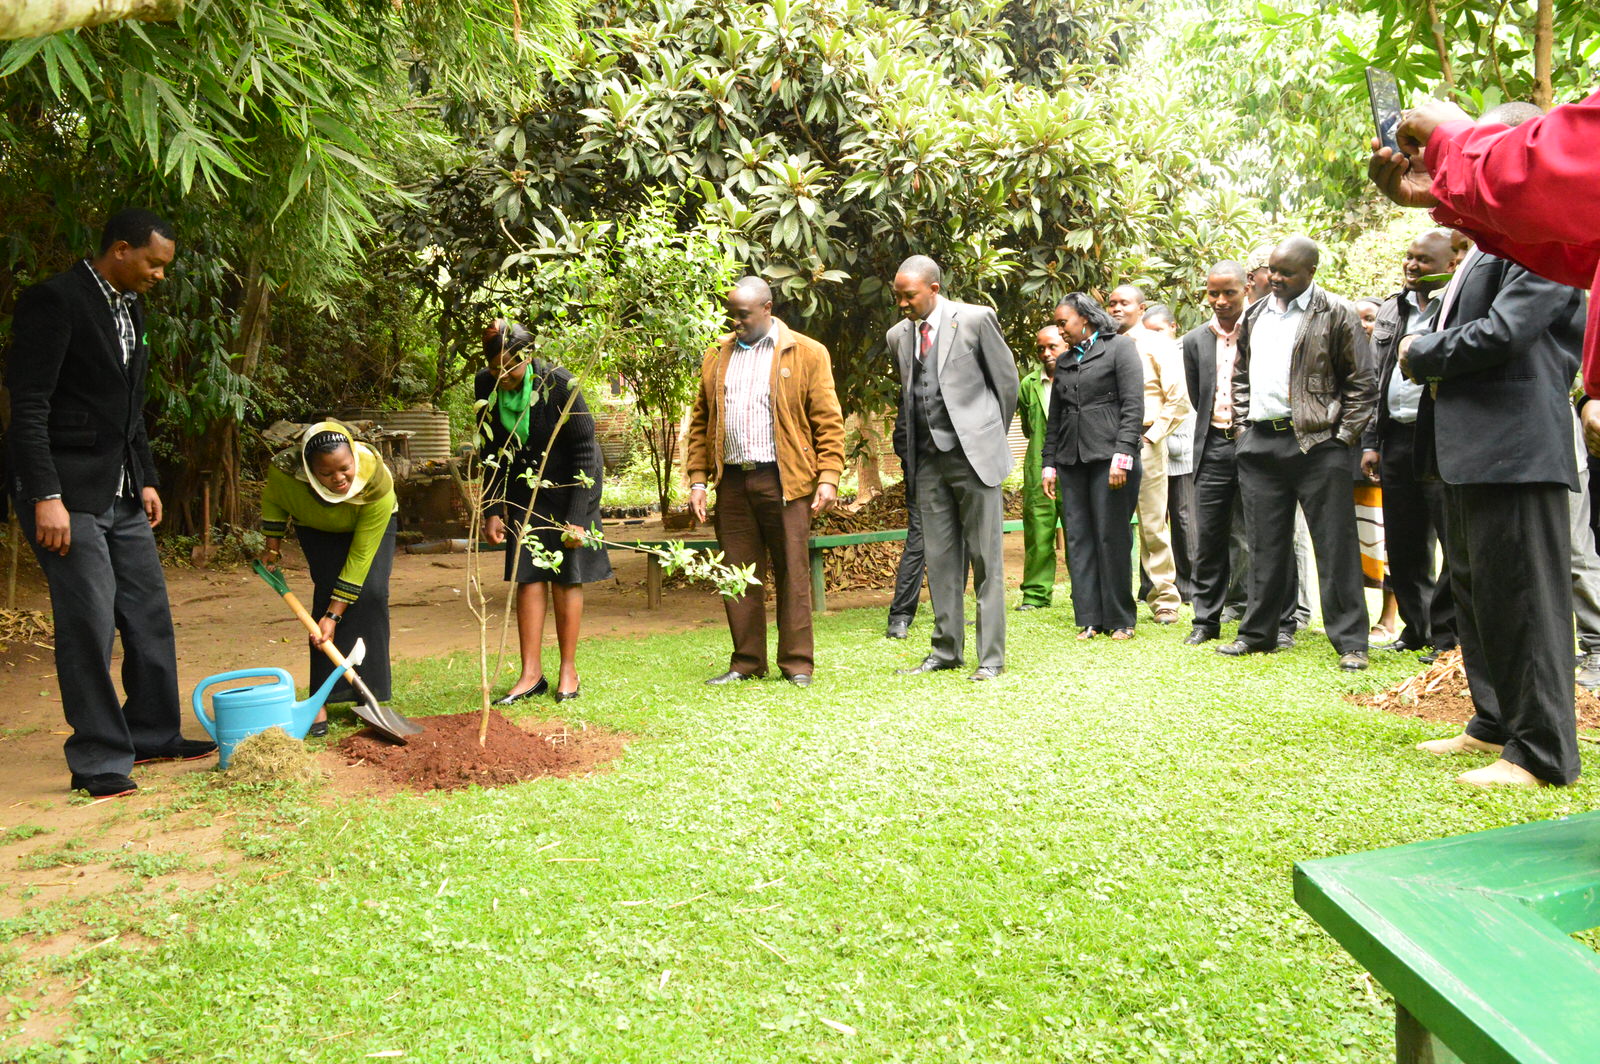 The Green Belt Movement team led by the Executive Director plants a tree to mark this special day